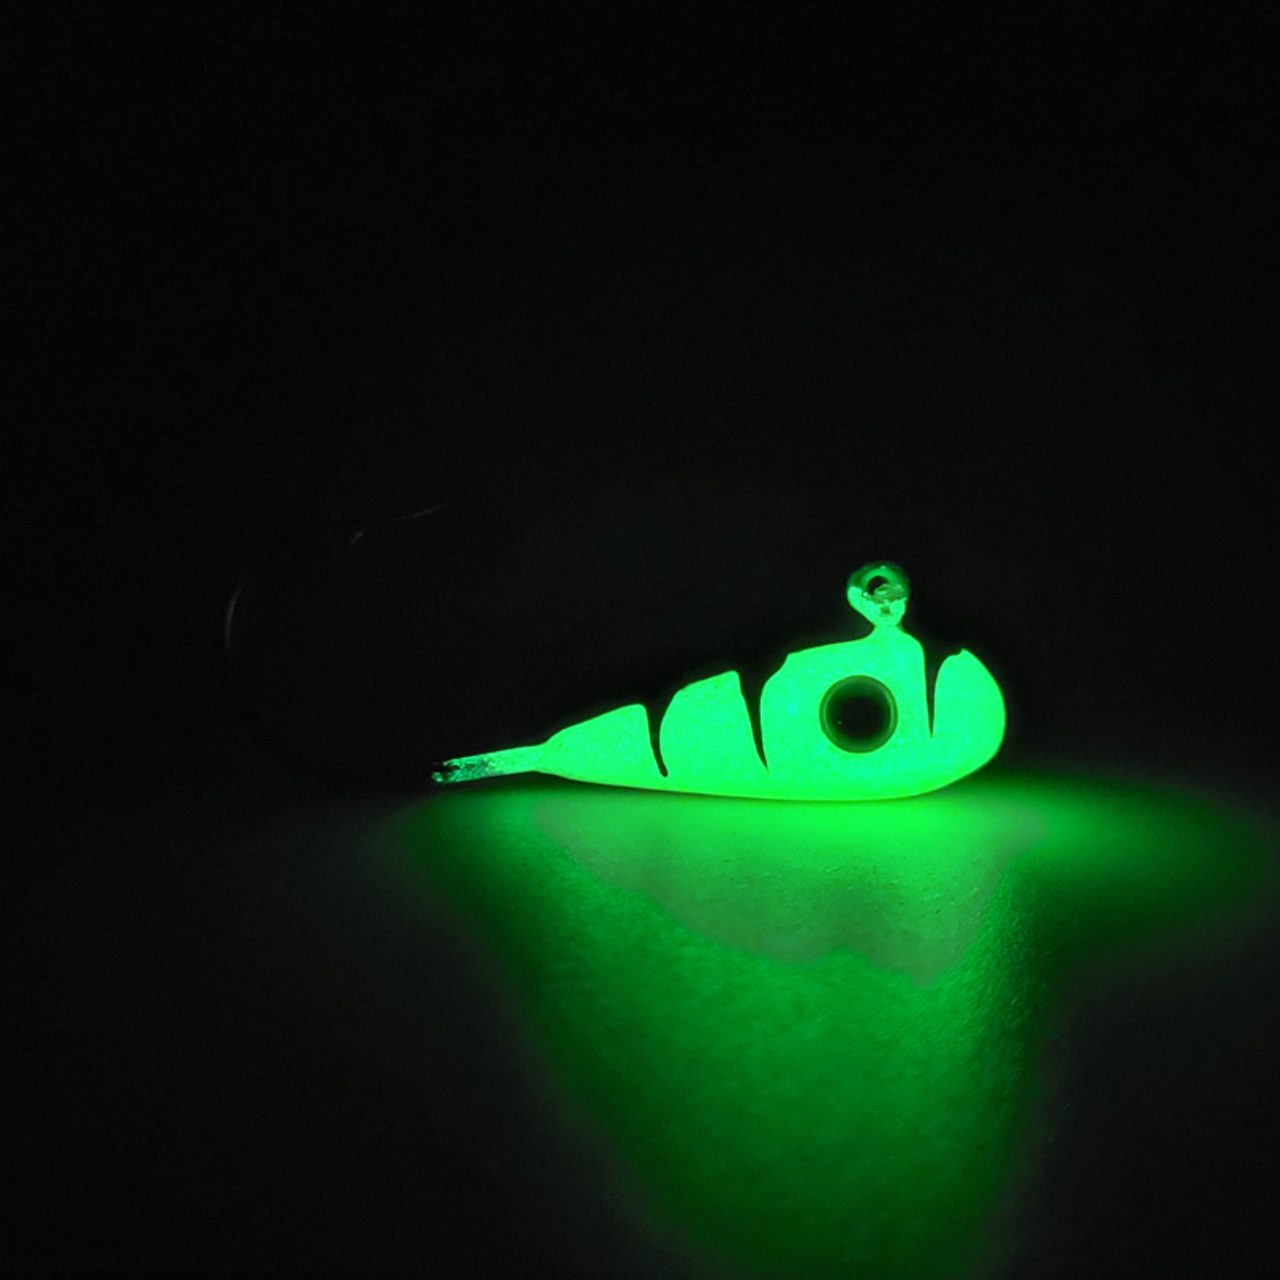 kaleidoscope Jigs are for all fish species.
Our unique glow finish really produces the slabs! For the brightest kryptonite glow, charge with our Black UV  Flashlight.

This ultra-violet flashlight is nearly invisible to the human eye, but does a real number on the Kryptonite Glow!

Use All Kryptonite Jigs at night and in stained water situations. Trust you can trust, you’ll be impressed! Tip with leeches, minnows or Plastics.